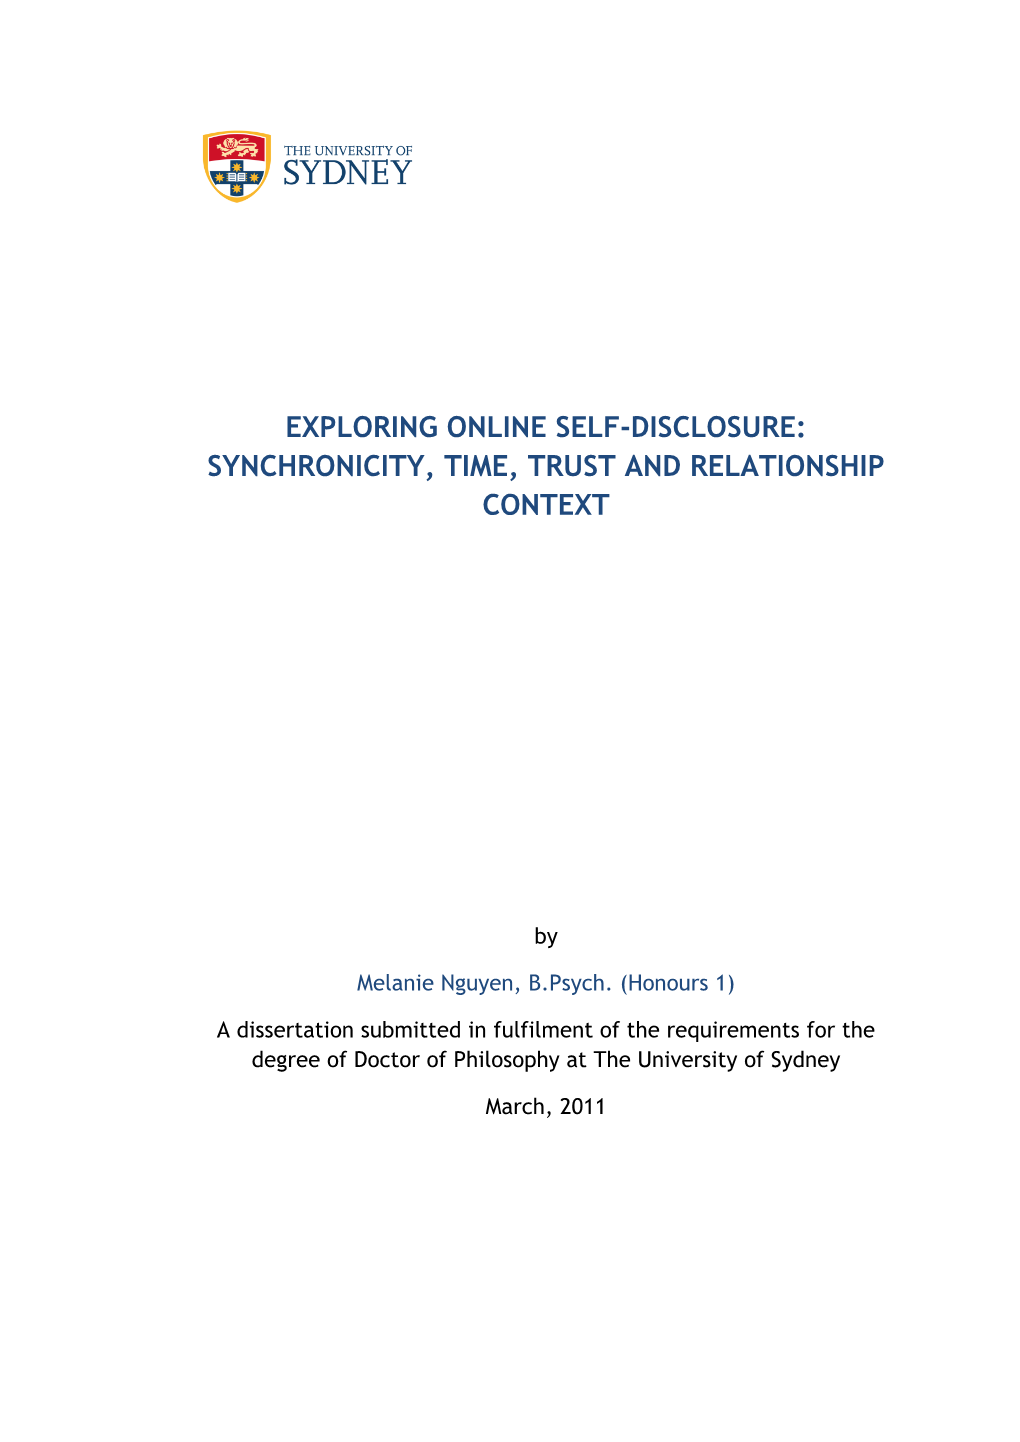 Exploring Online Self-Disclosure: Synchronicity, Time, Trust and Relationship Context